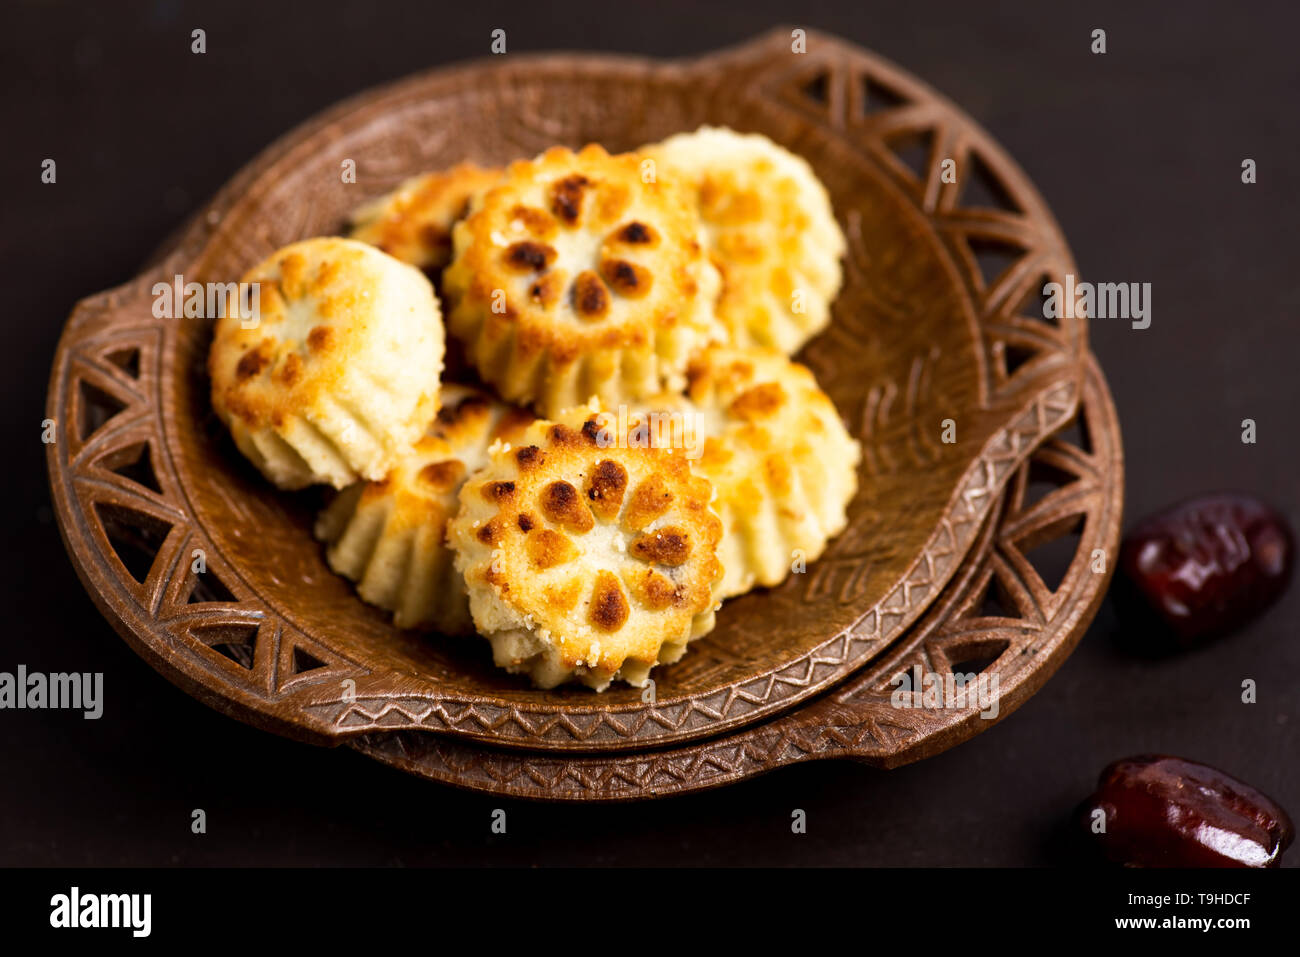 Arabic cookies with dates on a plate Stock Photo